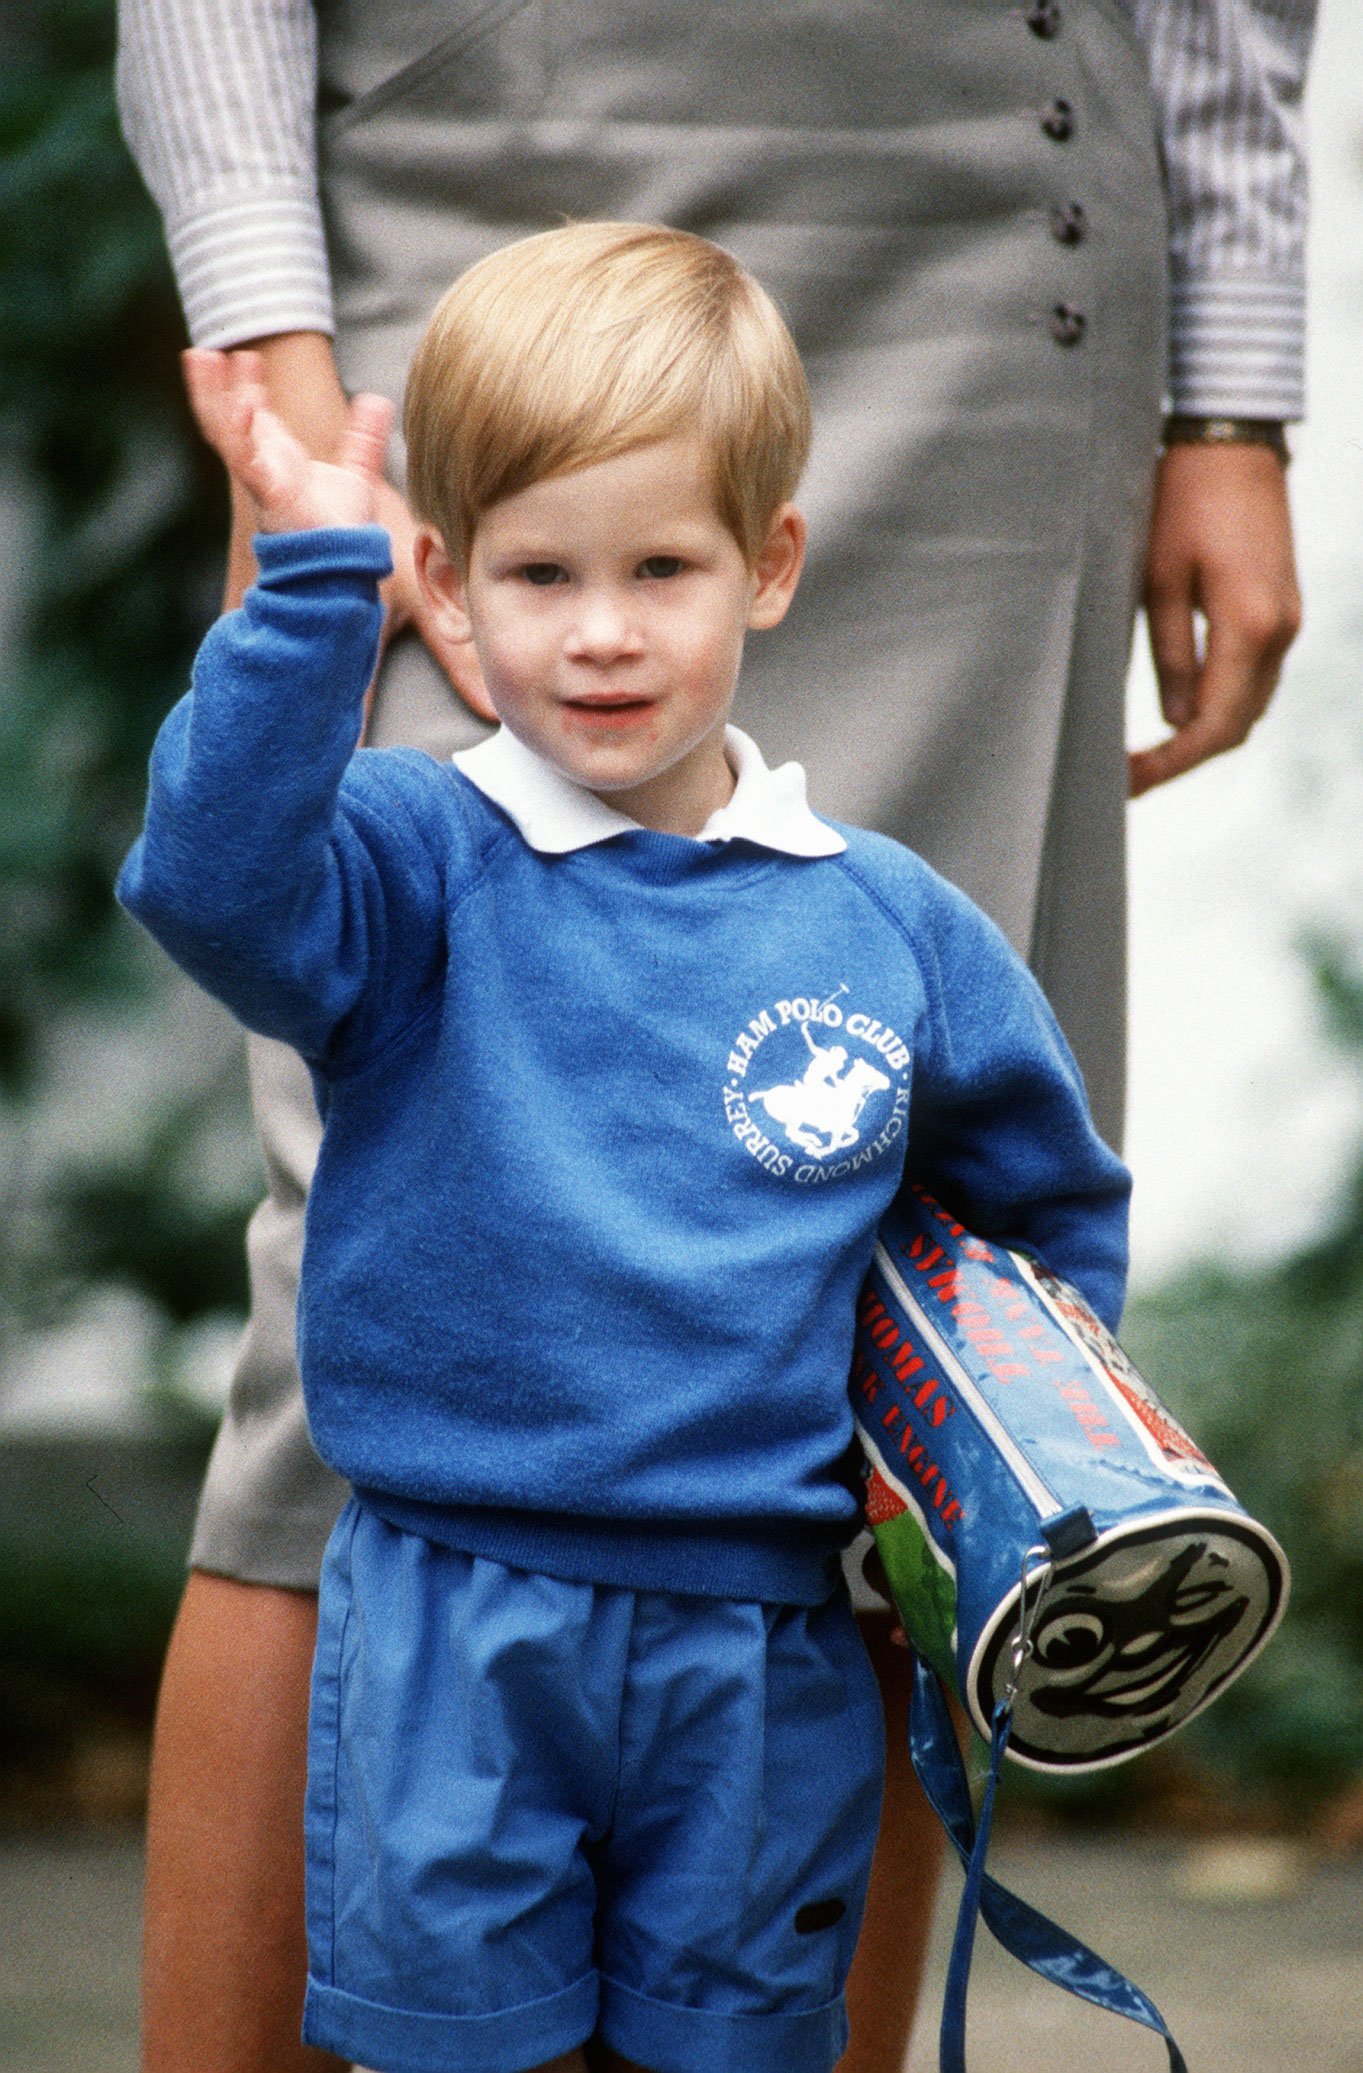 Prince Harry pictured on his first day at nursery school in Chepstow Villas in Kensington. / Source: Getty Images